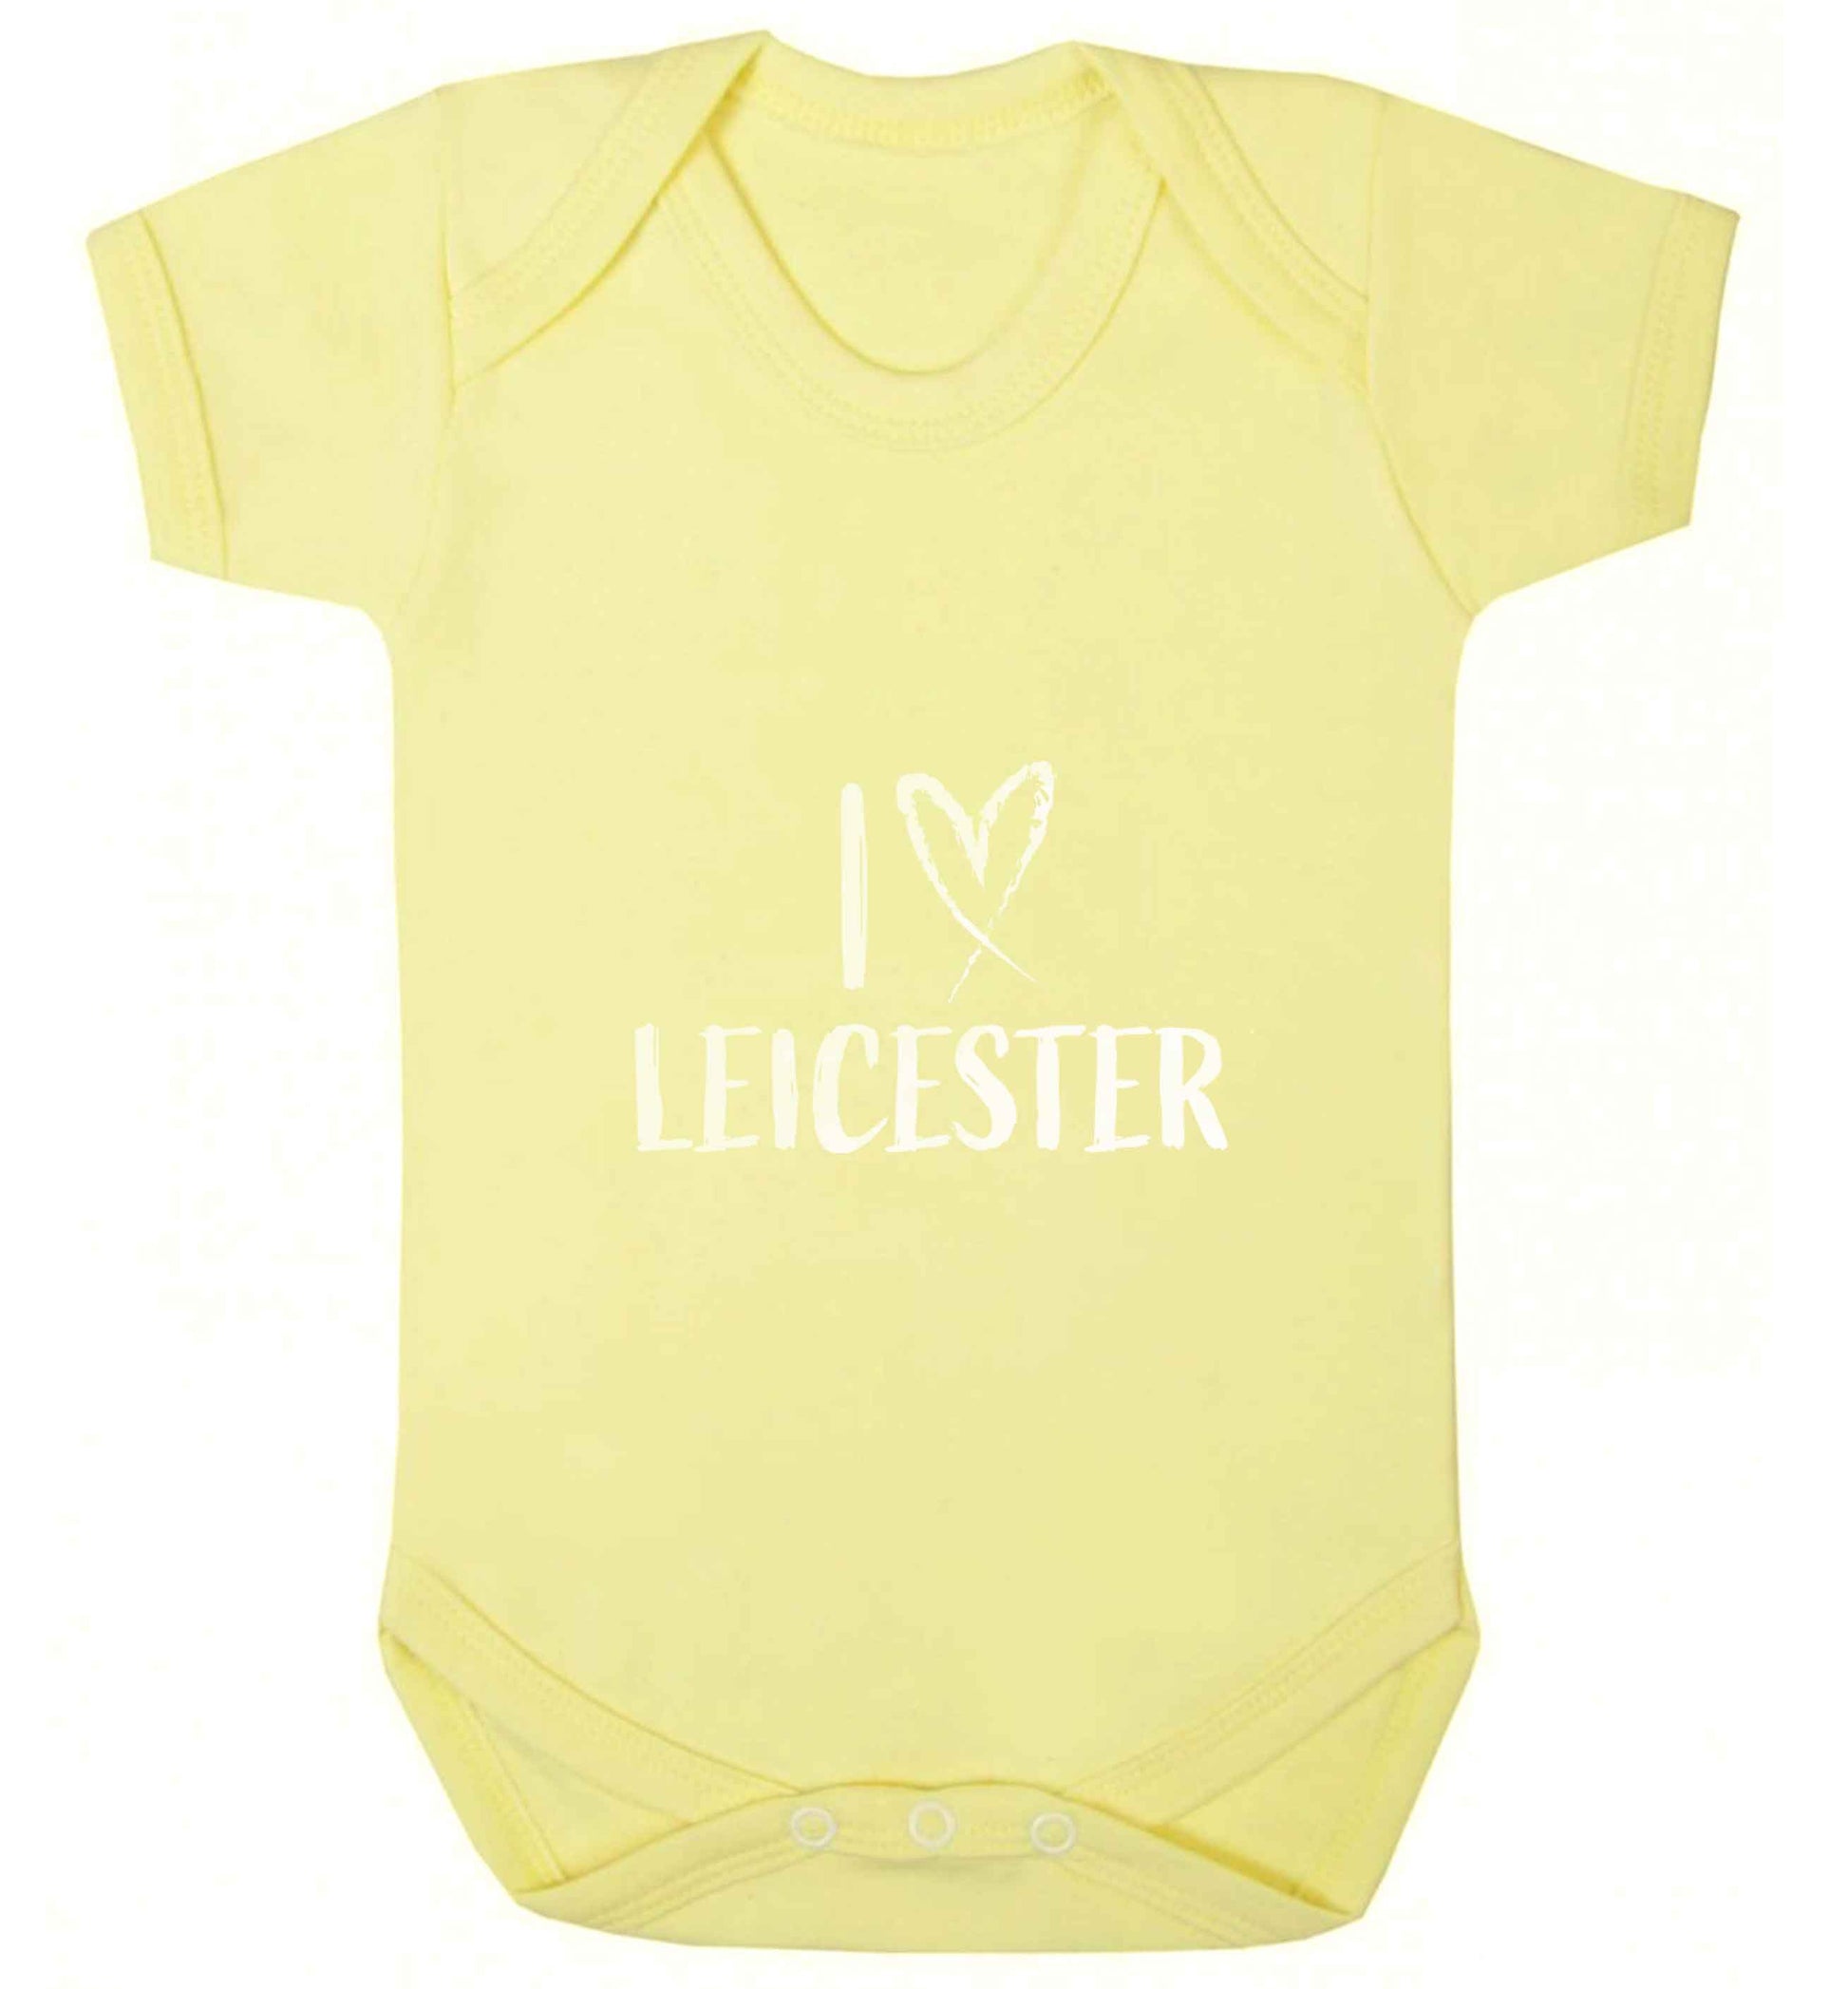 I love Leicester baby vest pale yellow 18-24 months